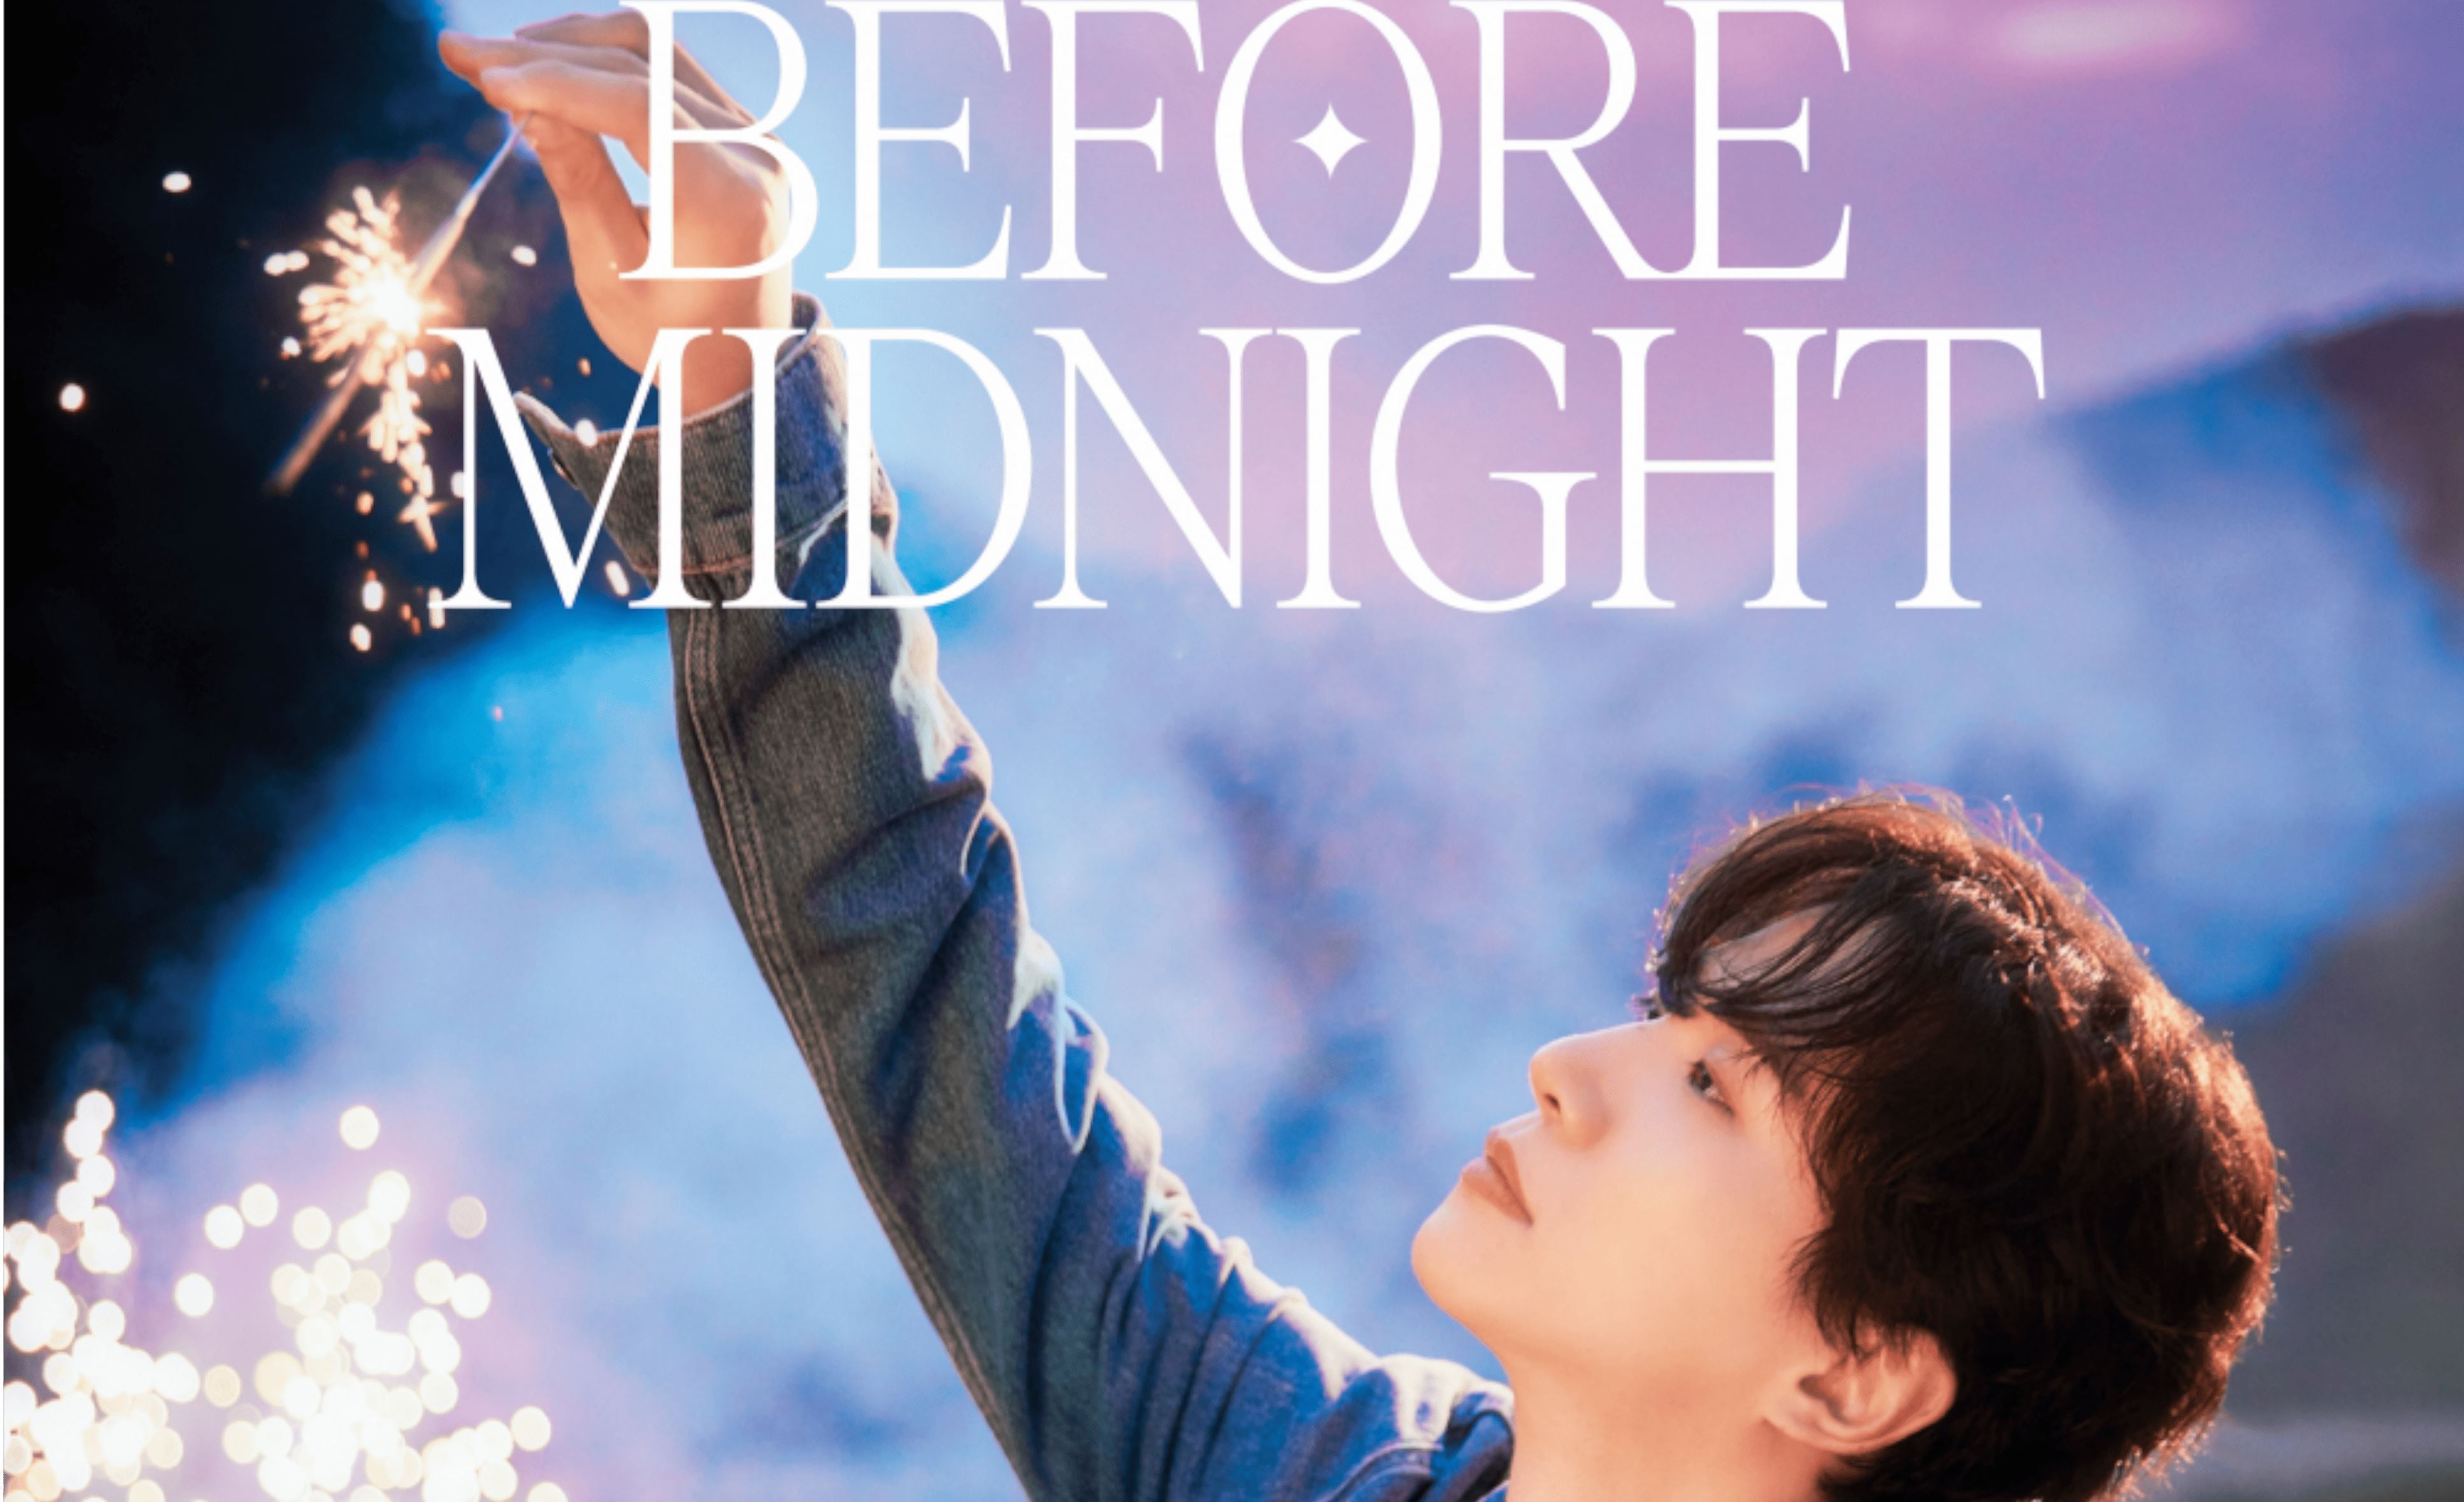 2PM's Lee Junho gibt Einblicke in sein 'Before Midnight' Fanmeeting!